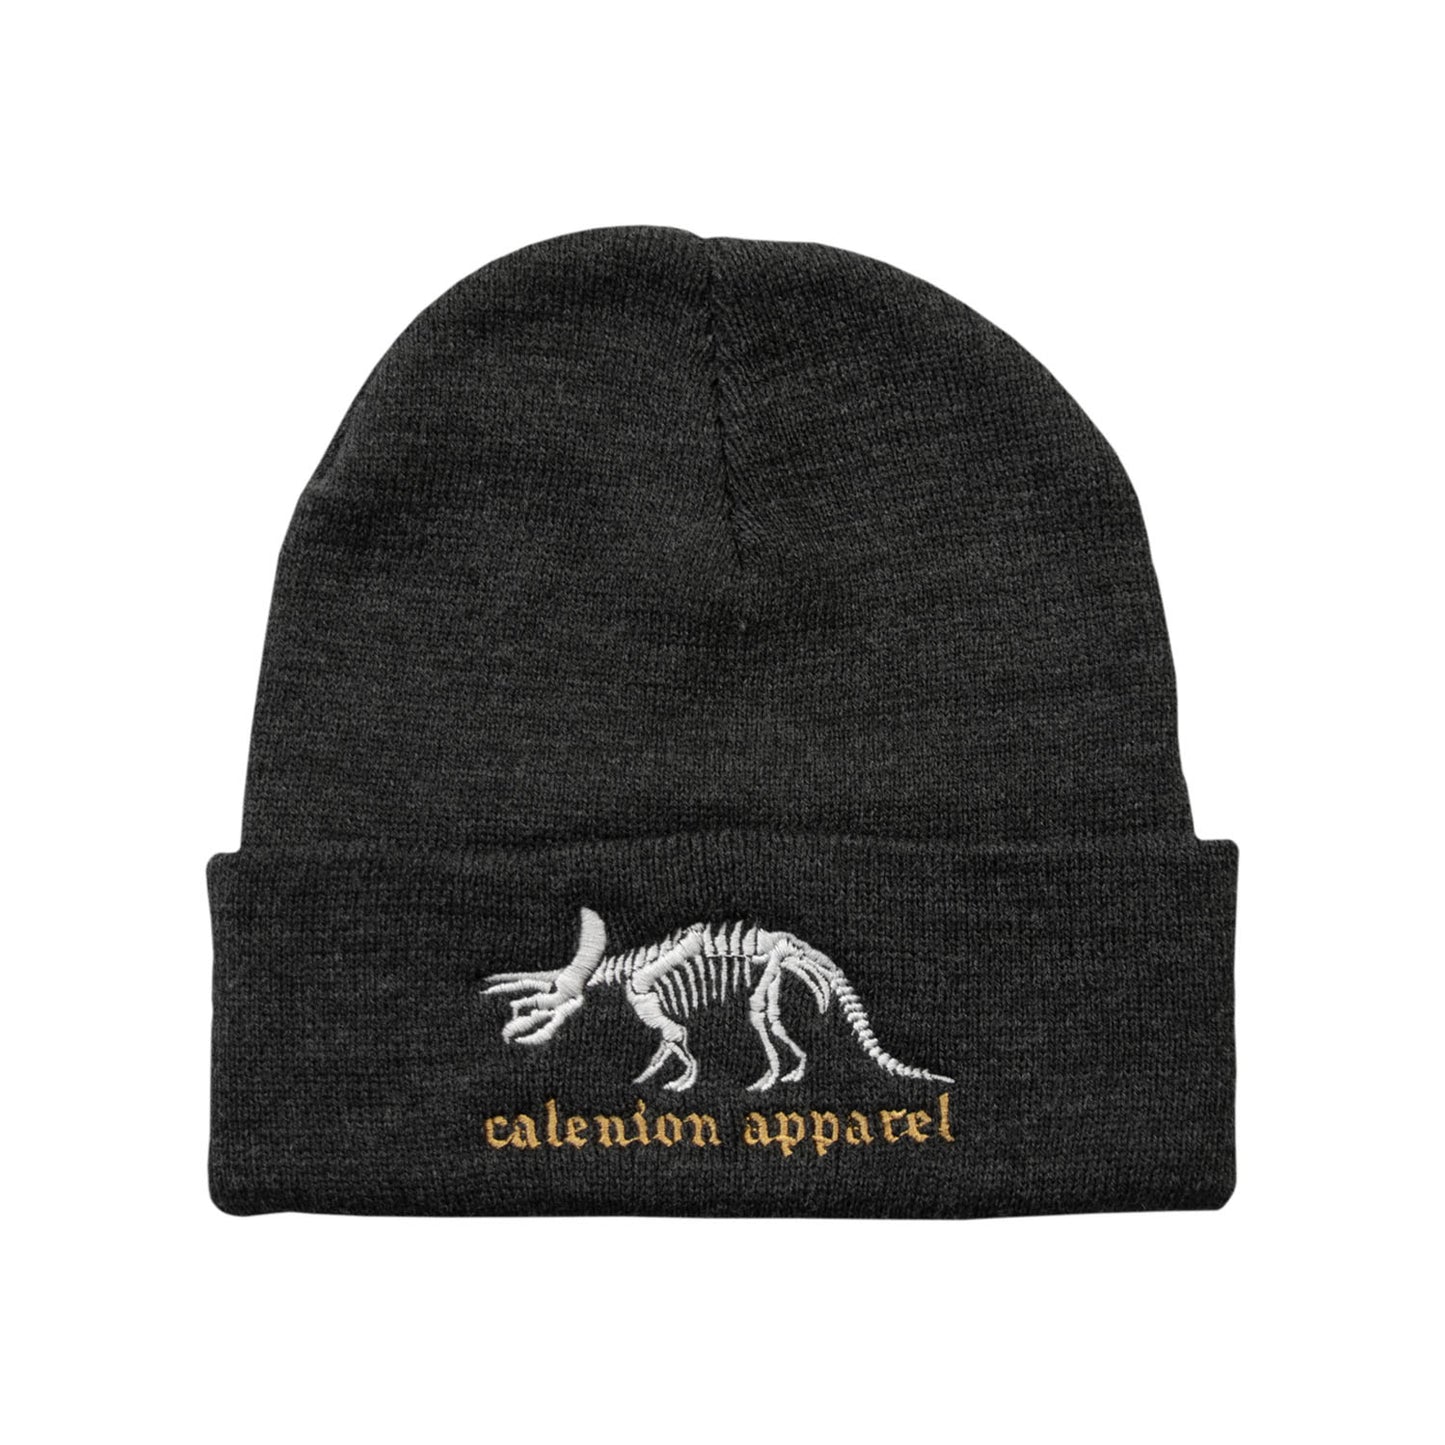 Triceratops Skeleton Beanie (Charcoal)